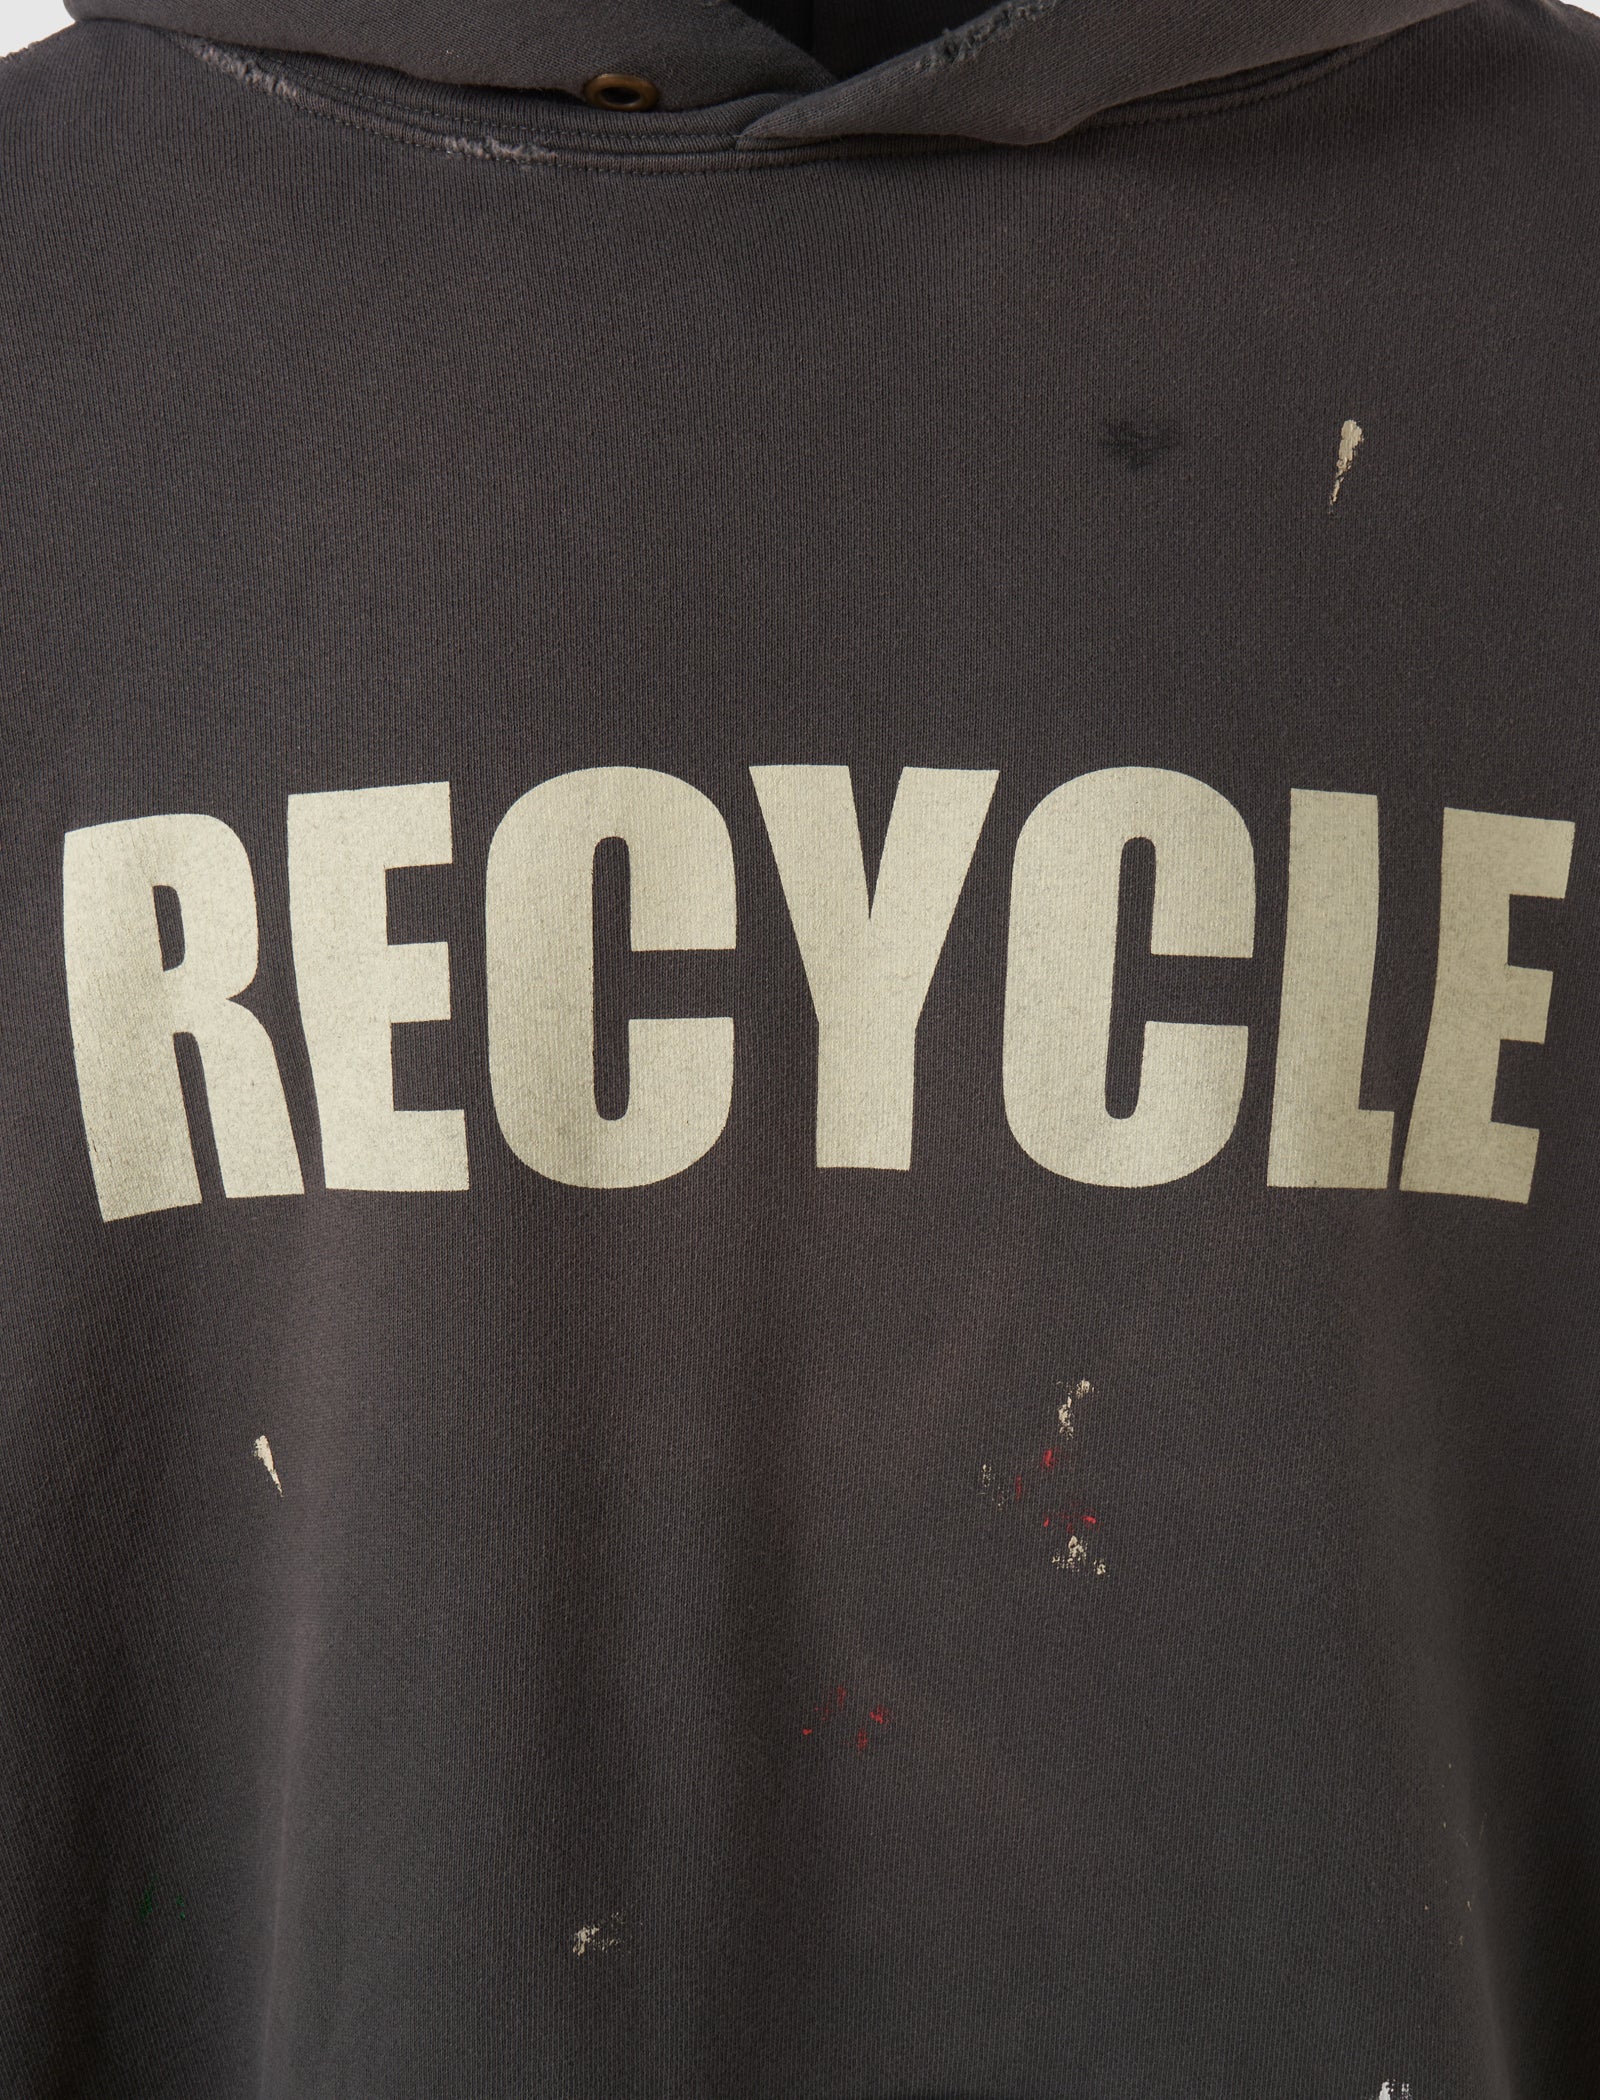 GALLERY DEPT. 90'S RECYCLE HOODIE – A Ma Maniere